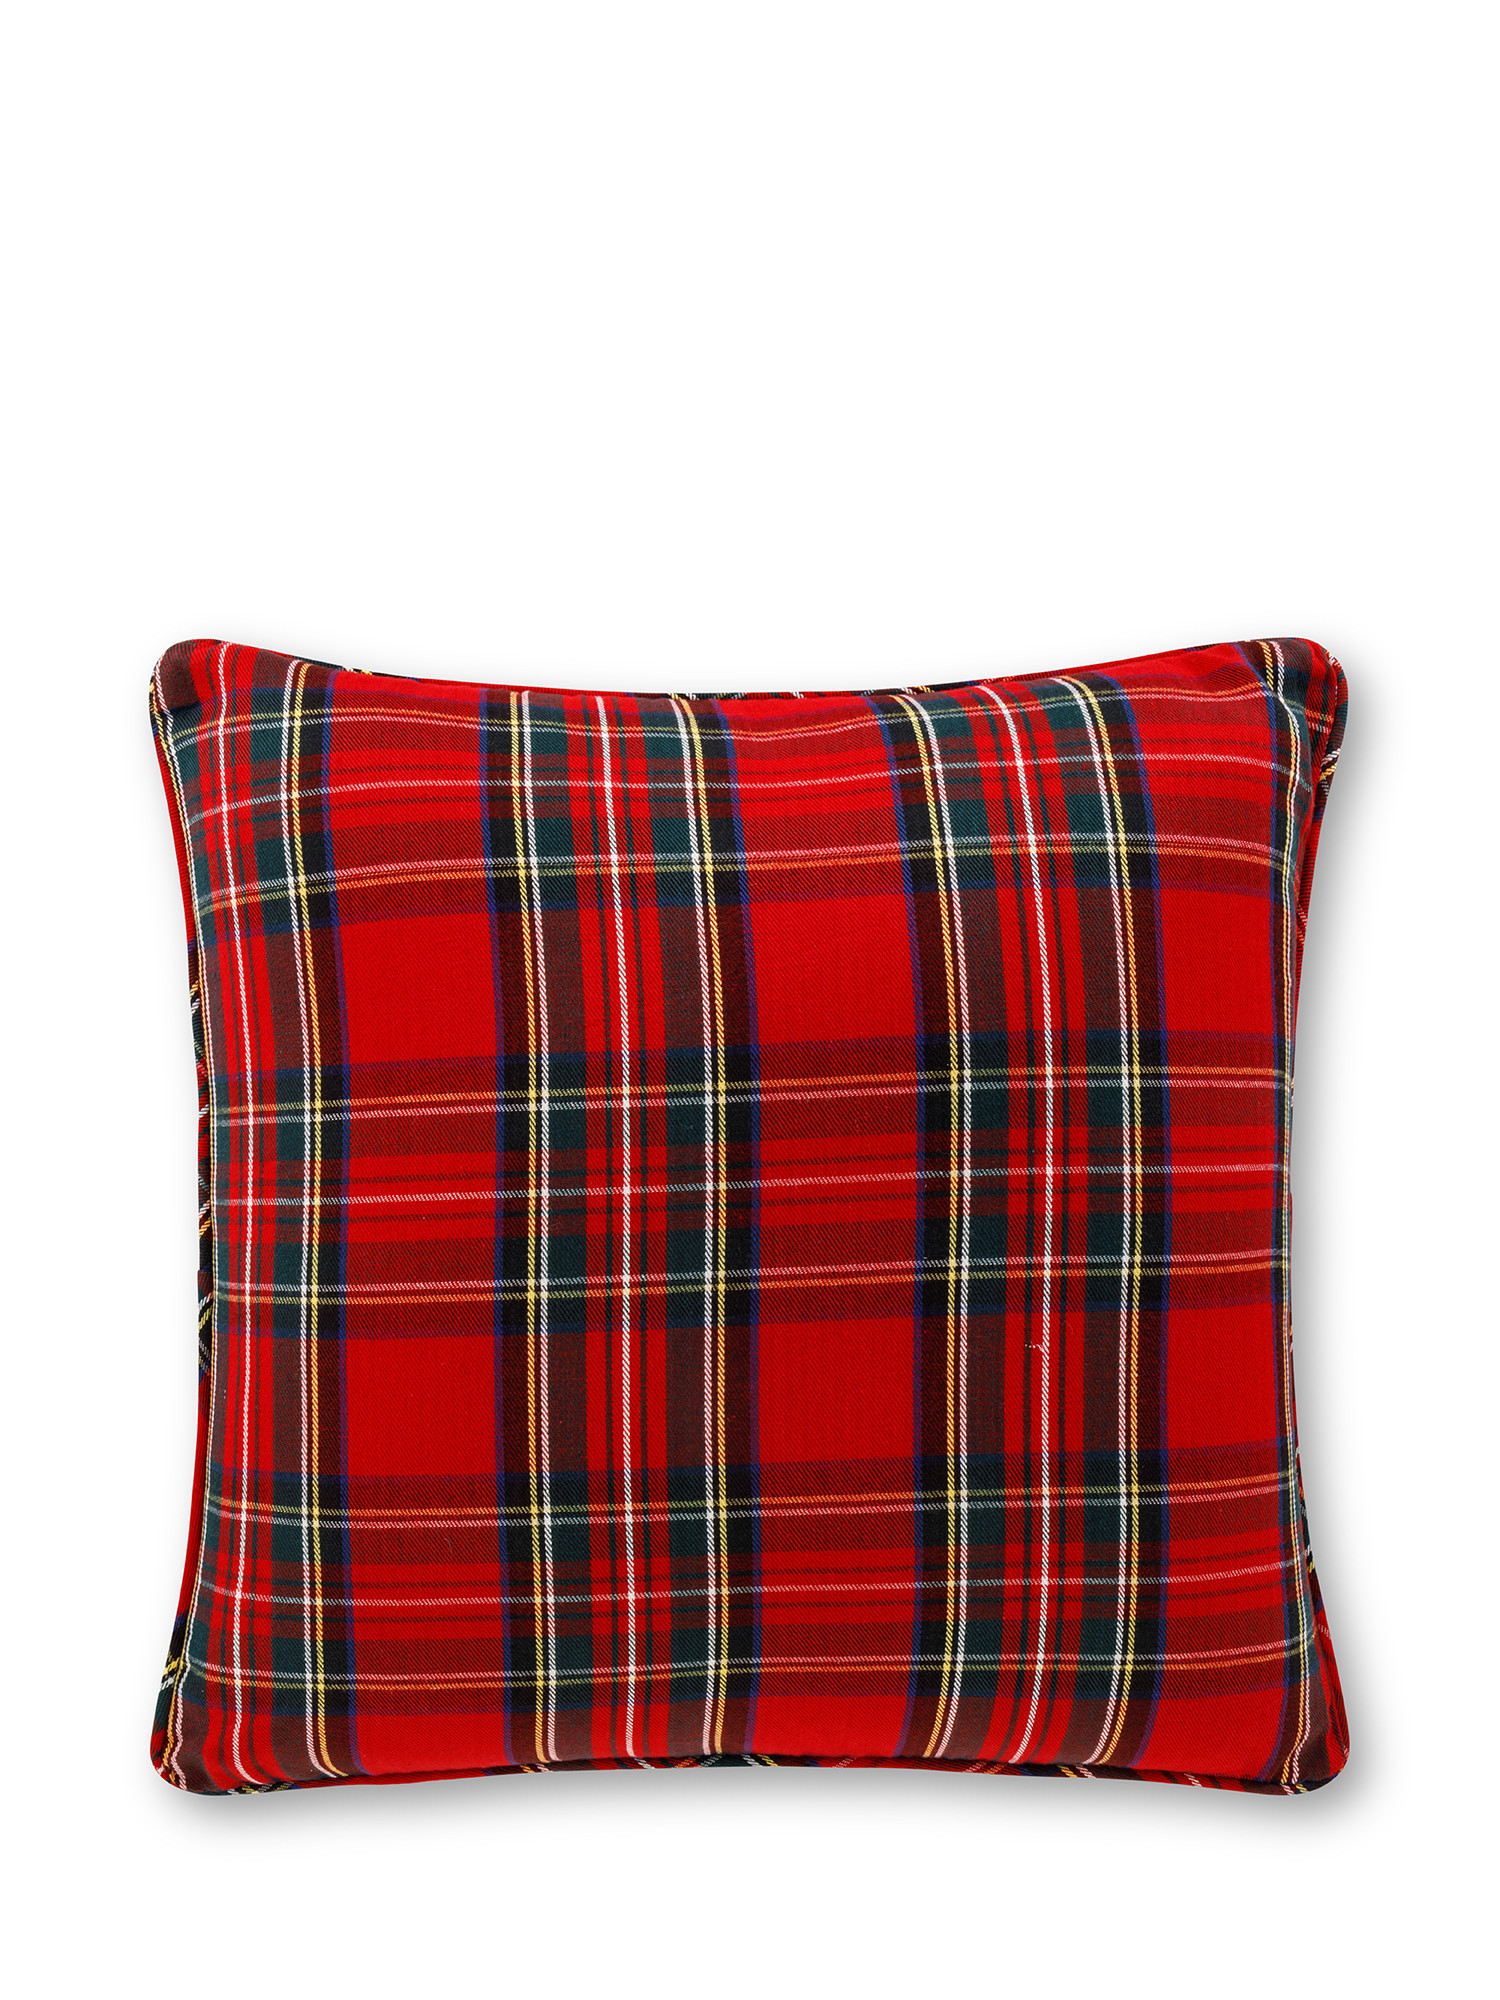 Cuscino in tartan 45x45 cm, Rosso, large image number 0